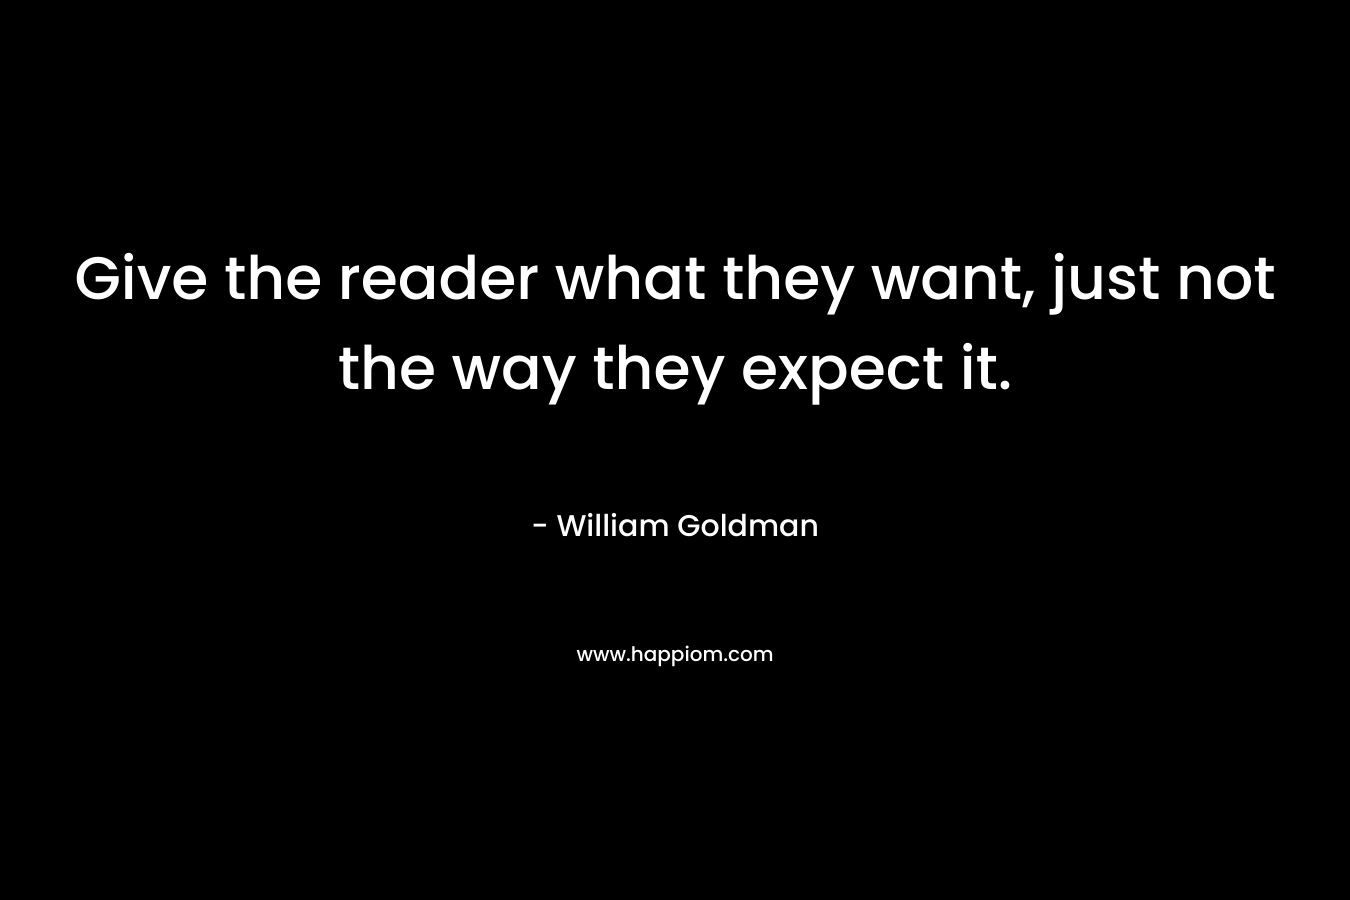 Give the reader what they want, just not the way they expect it. – William Goldman